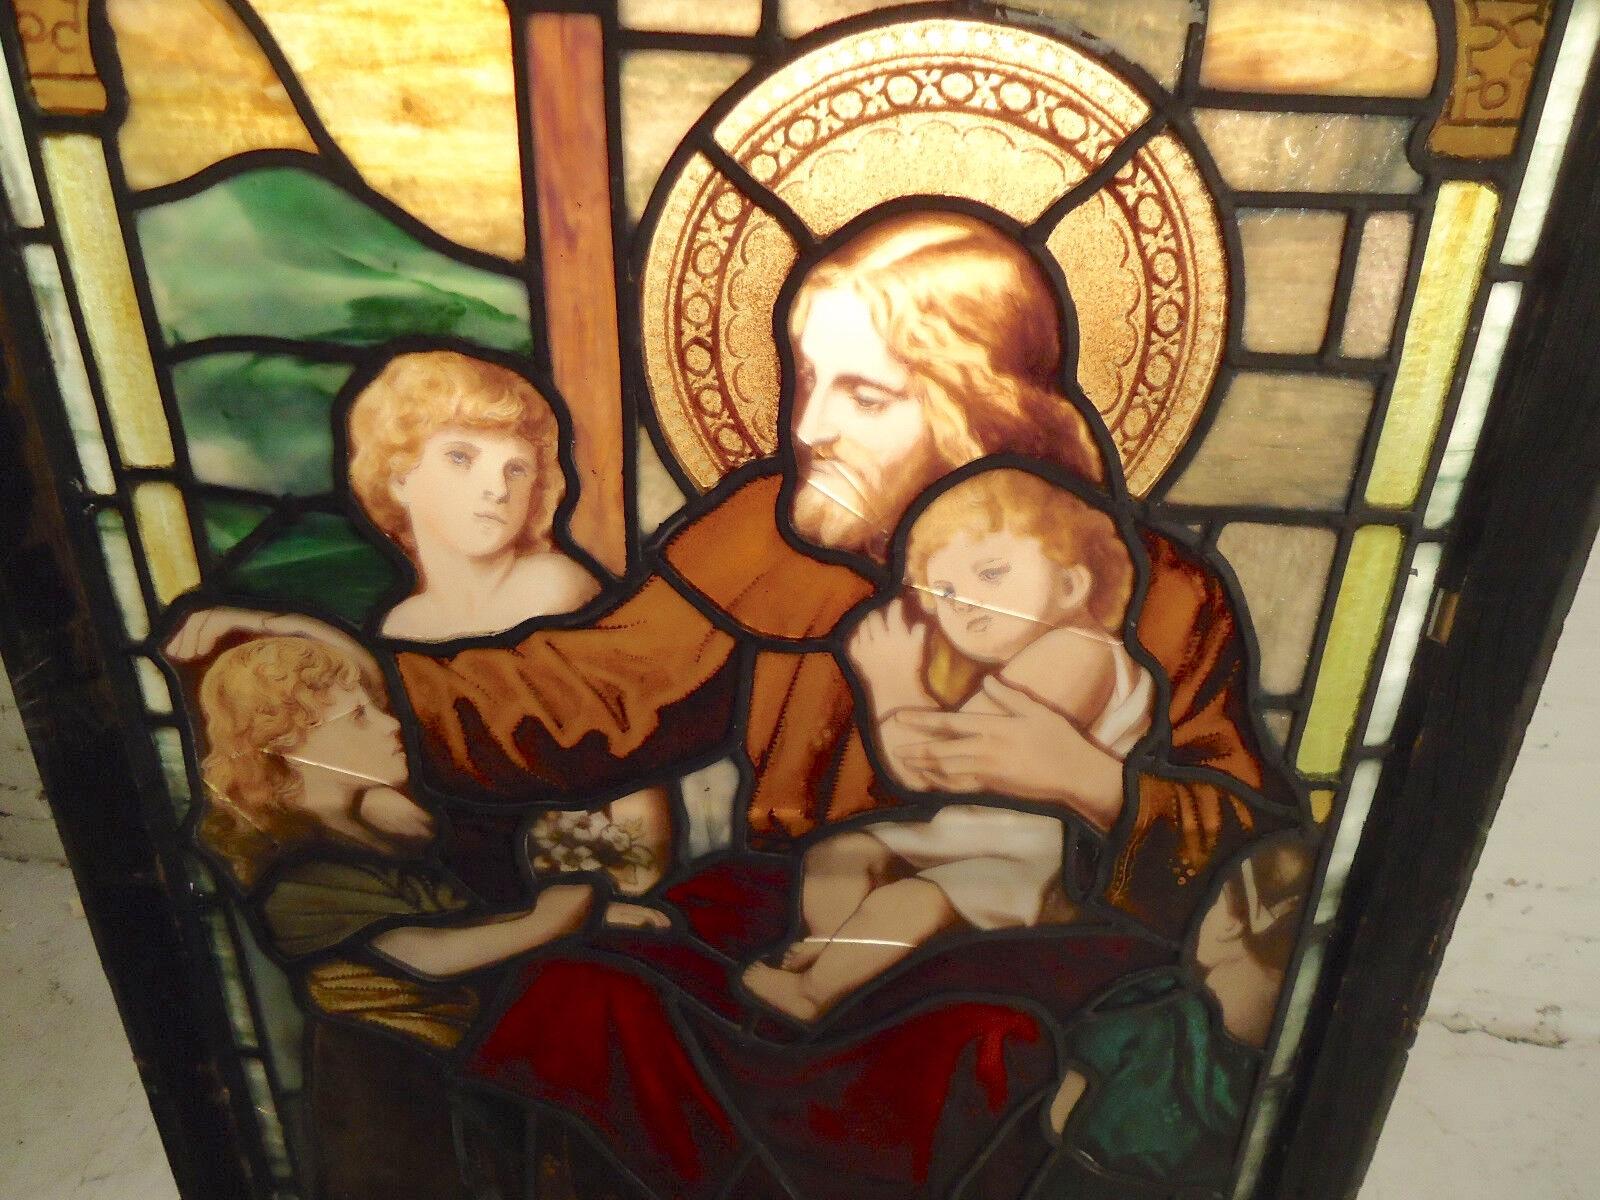 Very beautiful religious stained glass panel of Jesus and children.
Please confirm location NY or NJ